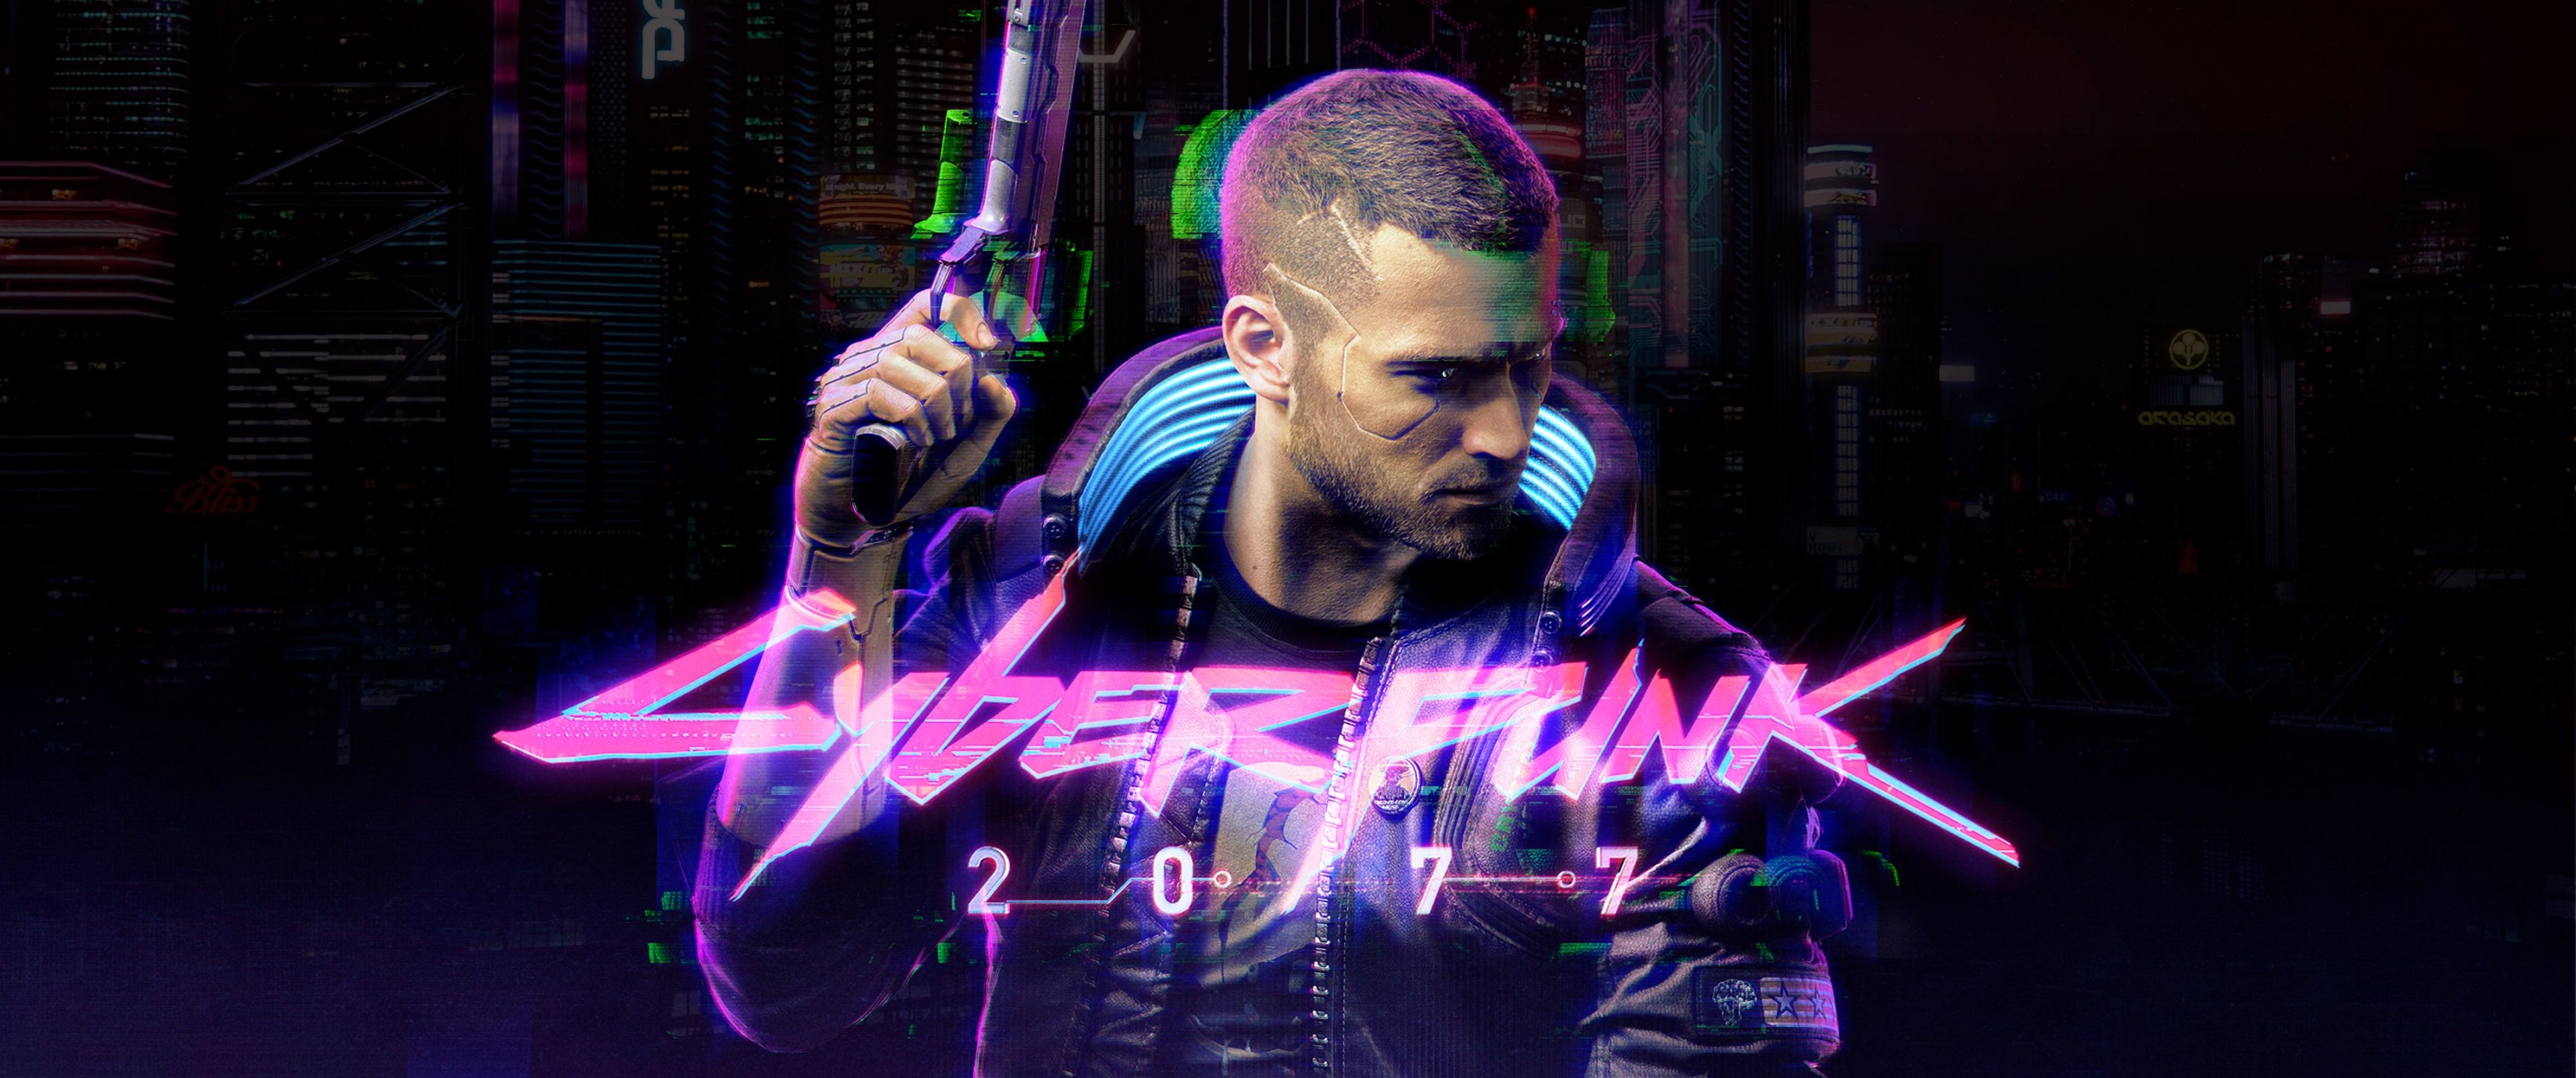 Cyberpunk 2077 4k 2020 Game Wallpaper,HD Games Wallpapers,4k Wallpapers ,Images,Backgrounds,Photos and Pictures